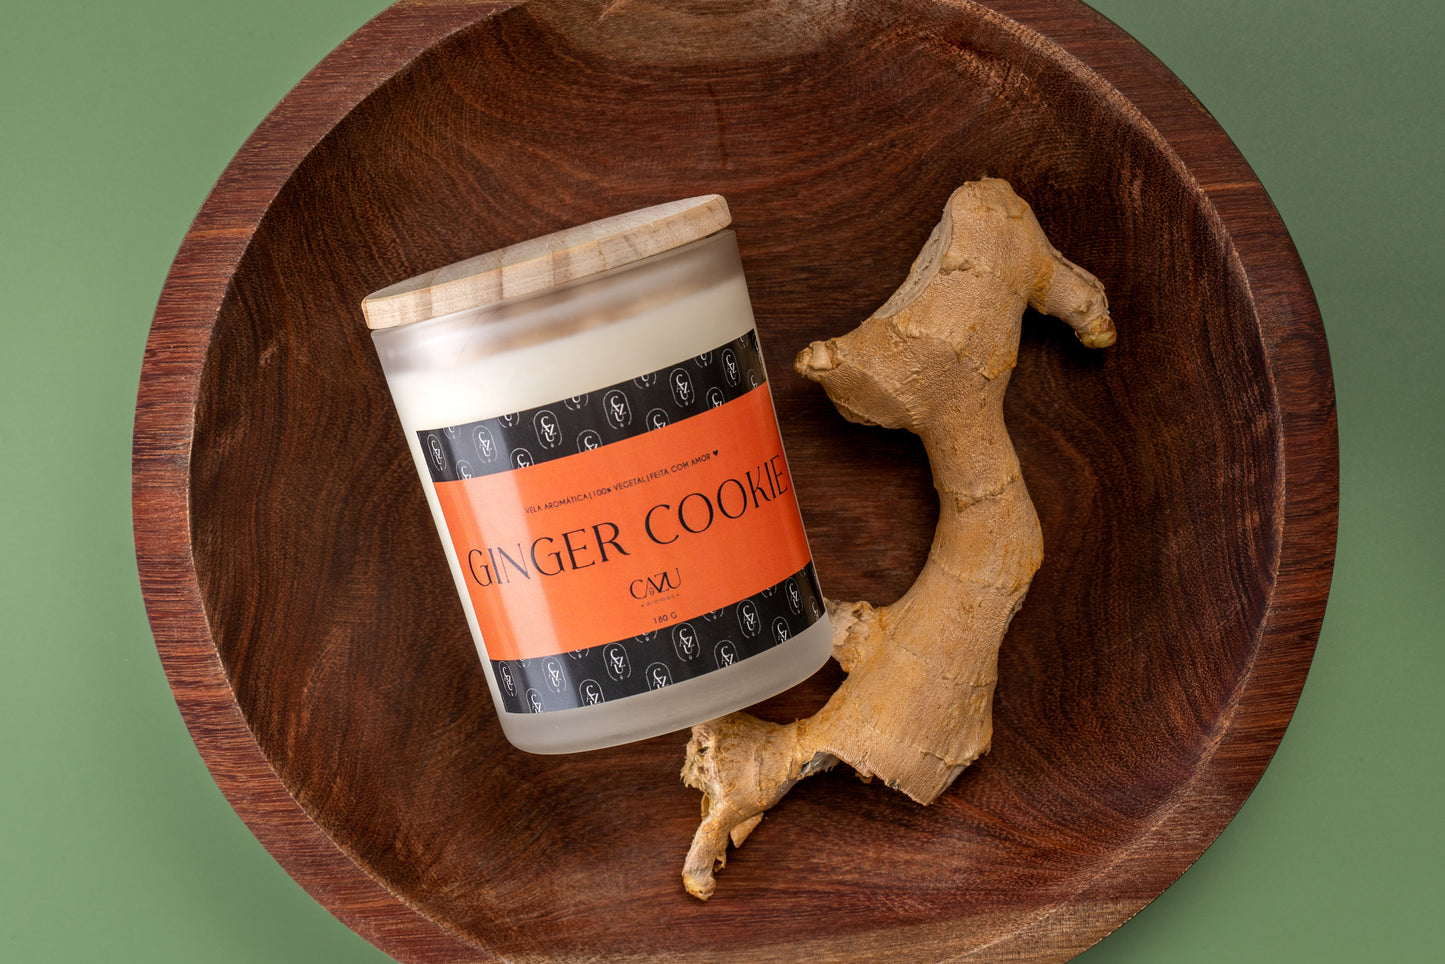 Ginger Cookie scented candle